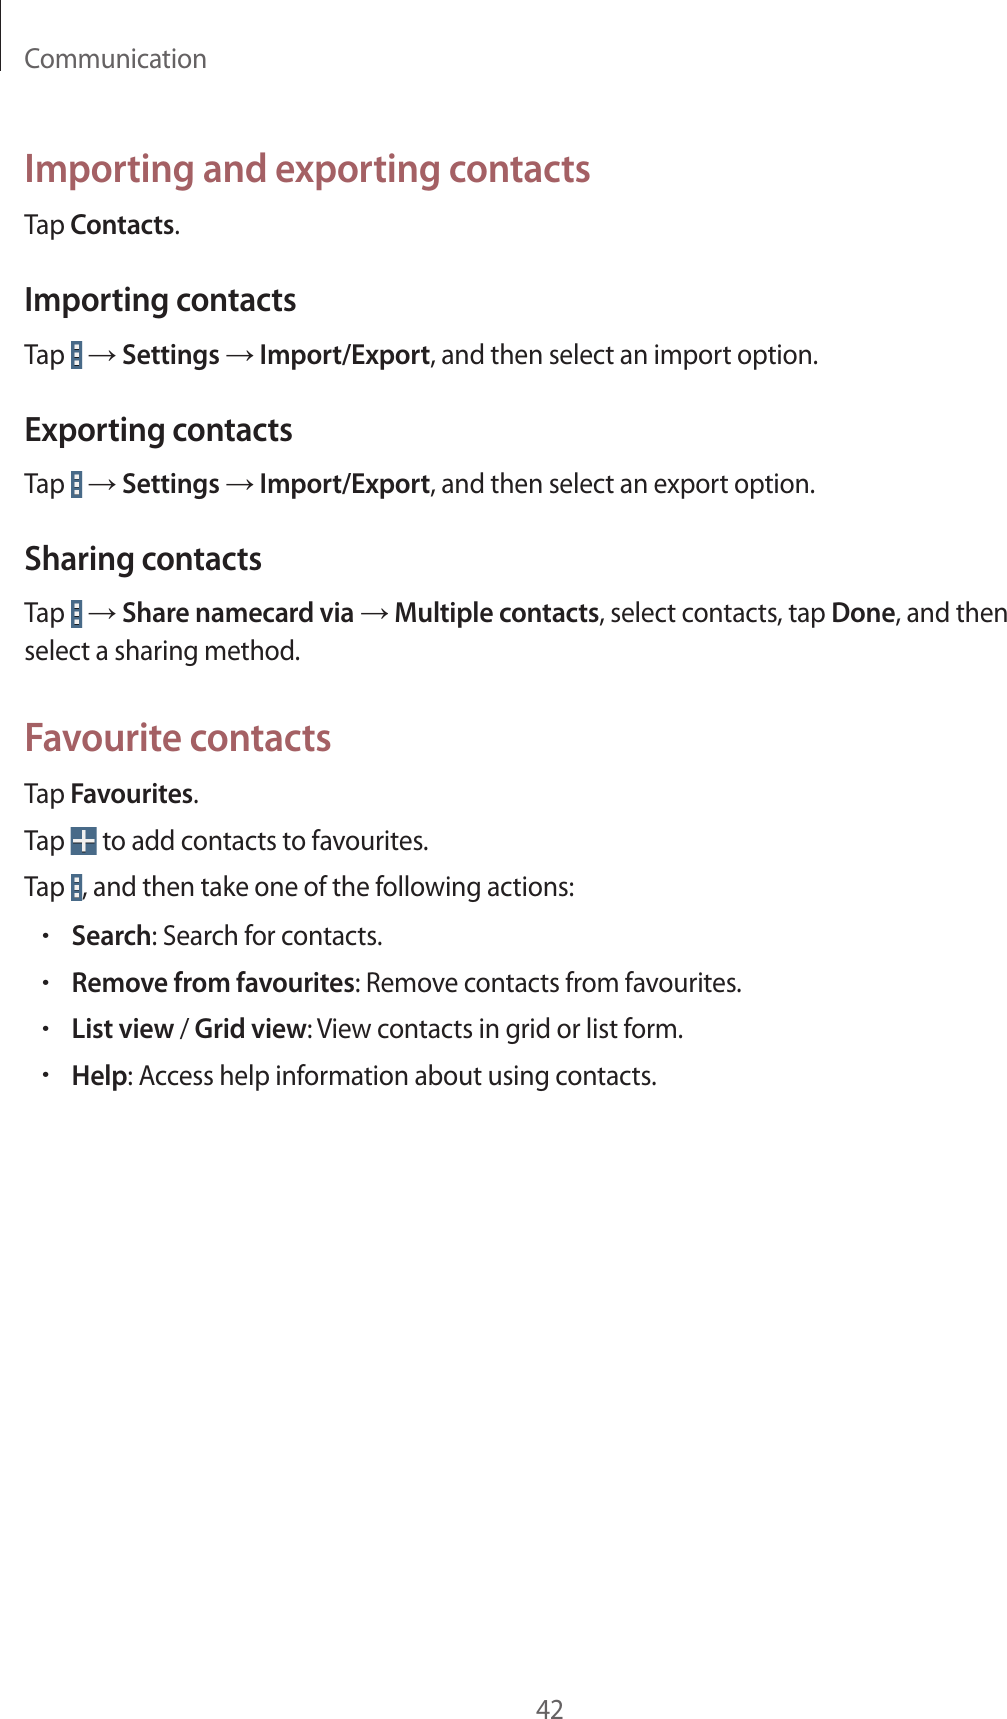 Communication42Importing and exporting contactsTap Contacts.Importing contactsTap   → Settings → Import/Export, and then select an import option.Exporting contactsTap   → Settings → Import/Export, and then select an export option.Sharing contactsTap   → Share namecard via → Multiple contacts, select contacts, tap Done, and then select a sharing method.Favourite contactsTap Favourites.Tap   to add contacts to favourites.Tap  , and then take one of the following actions:•Search: Search for contacts.•Remove from favourites: Remove contacts from favourites.•List view / Grid view: View contacts in grid or list form.•Help: Access help information about using contacts.